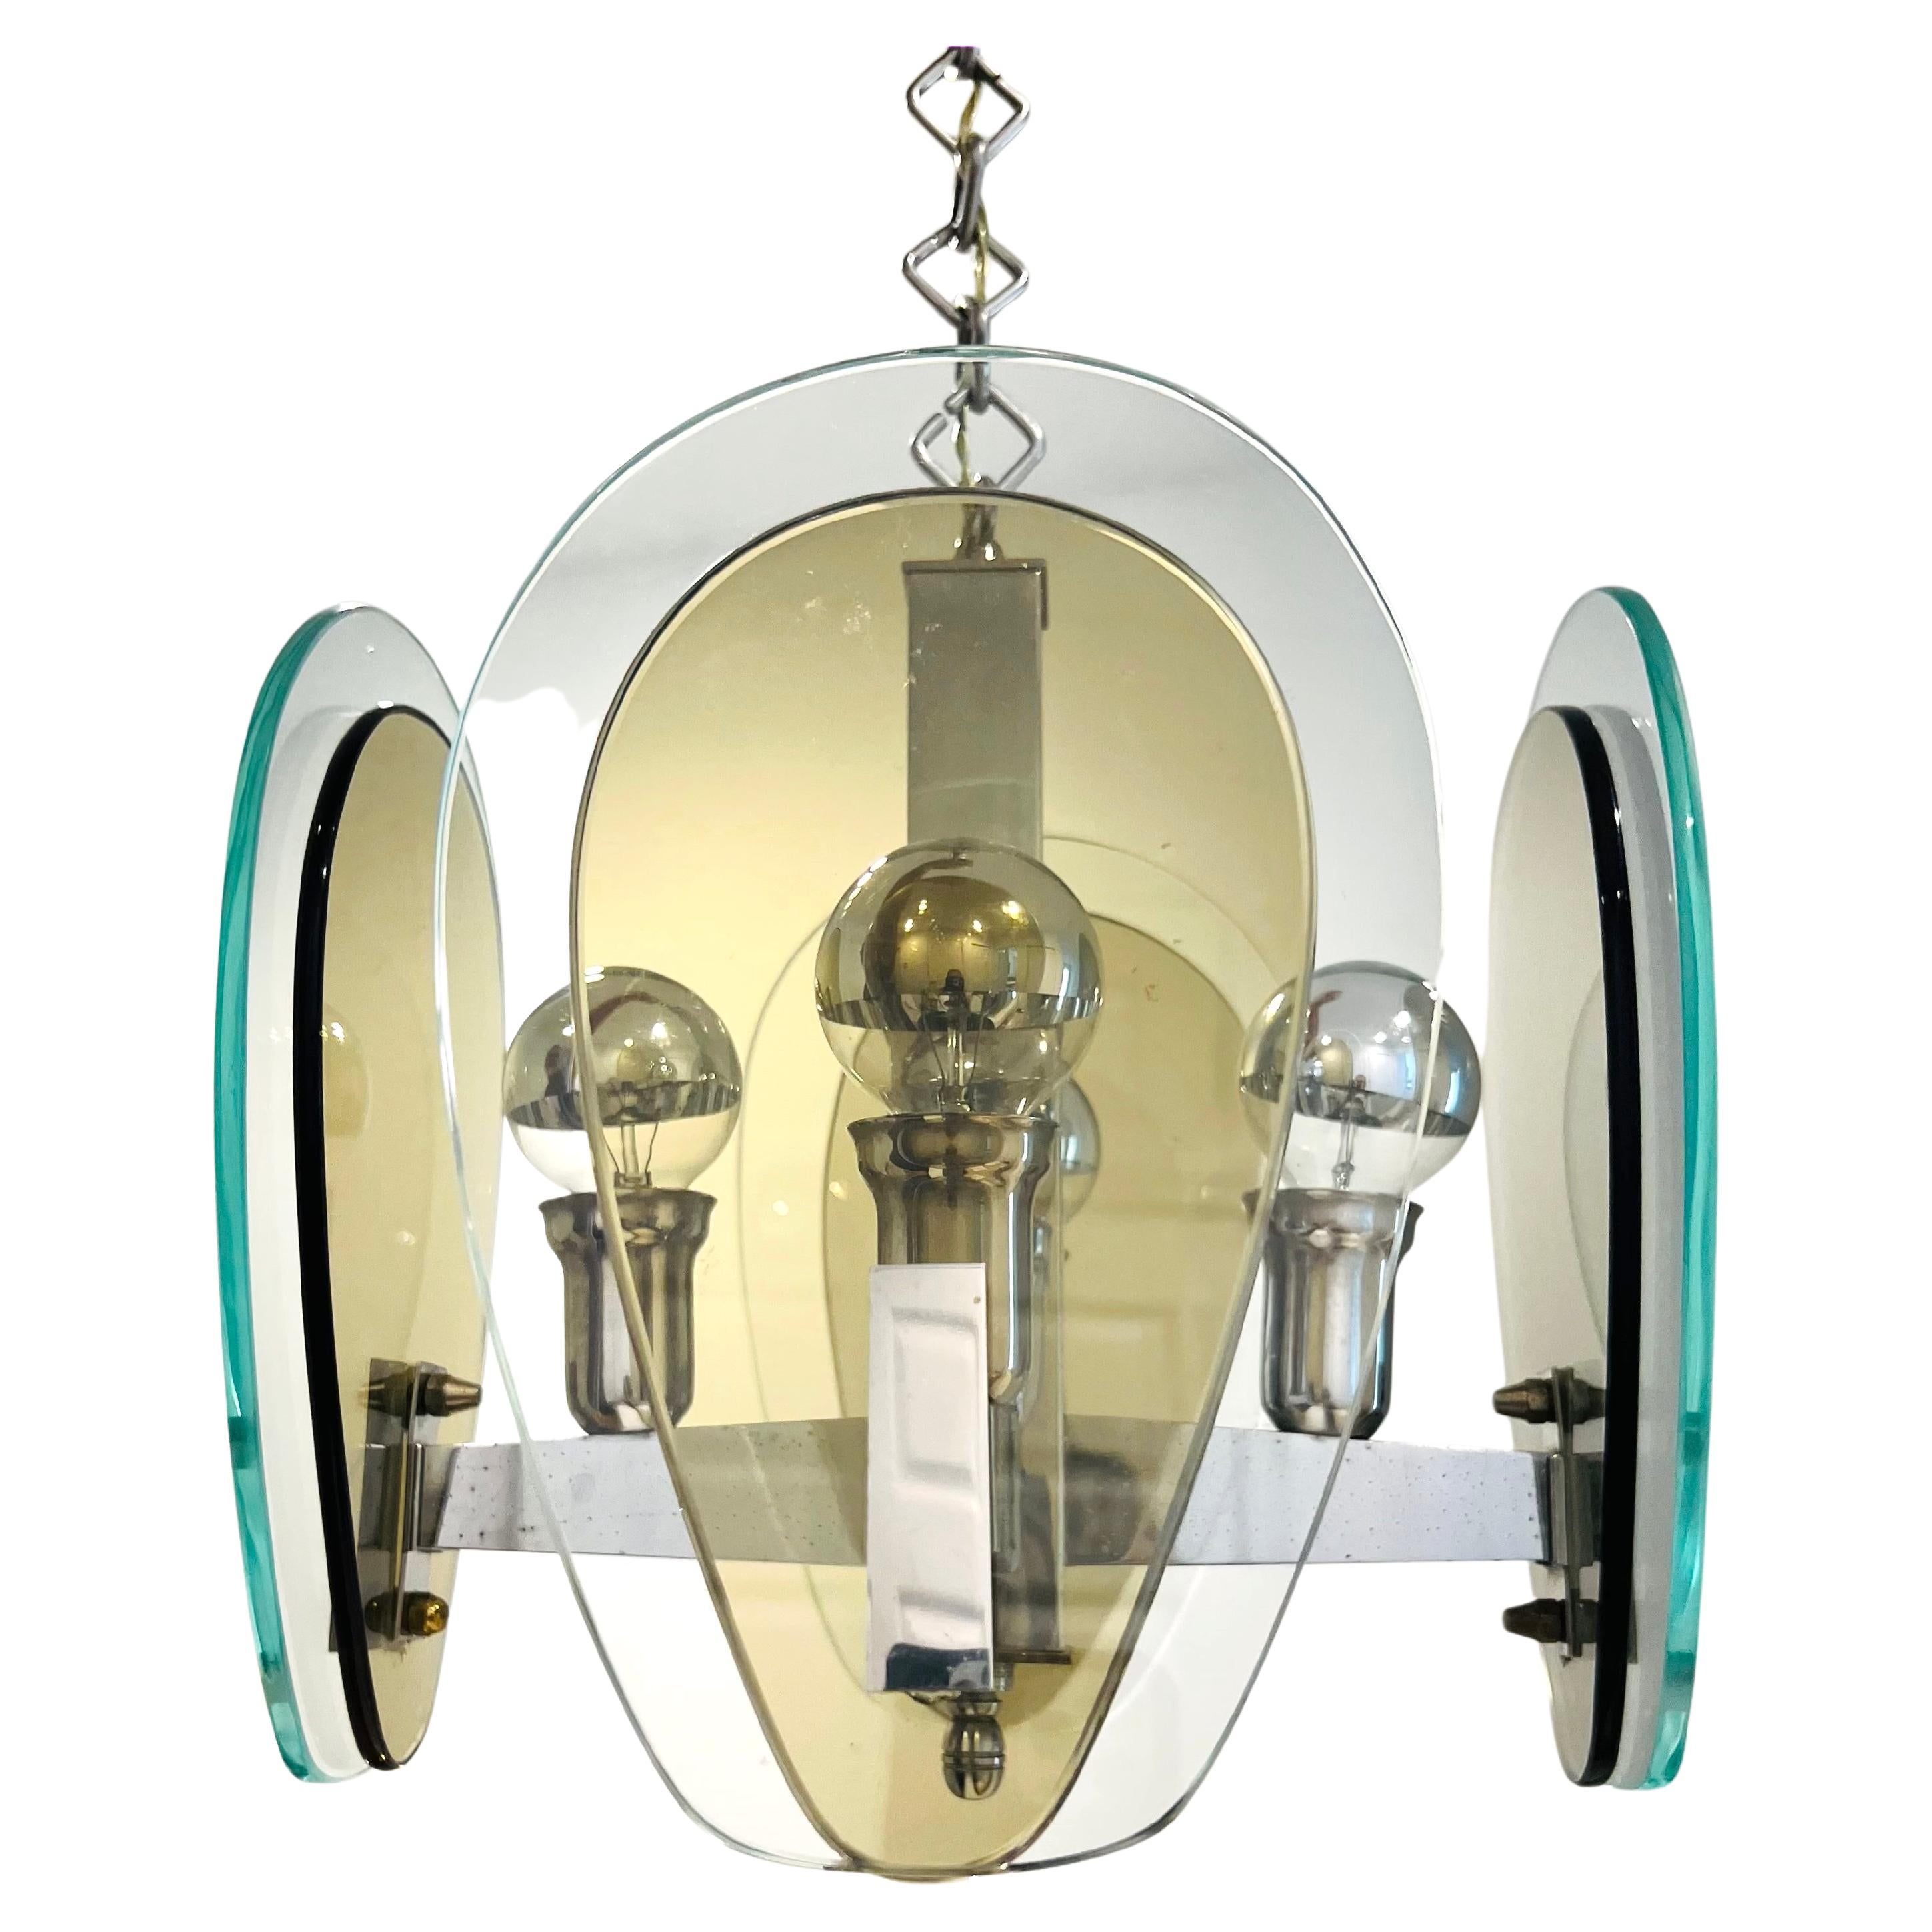 Mid-Century Modern architectural pendant light with four sided frame. Chandelier has chrome frame fitted with double teardrop glass shades in hues of smoked gray and clear green. Has original diamond link chain and features stylized chromed